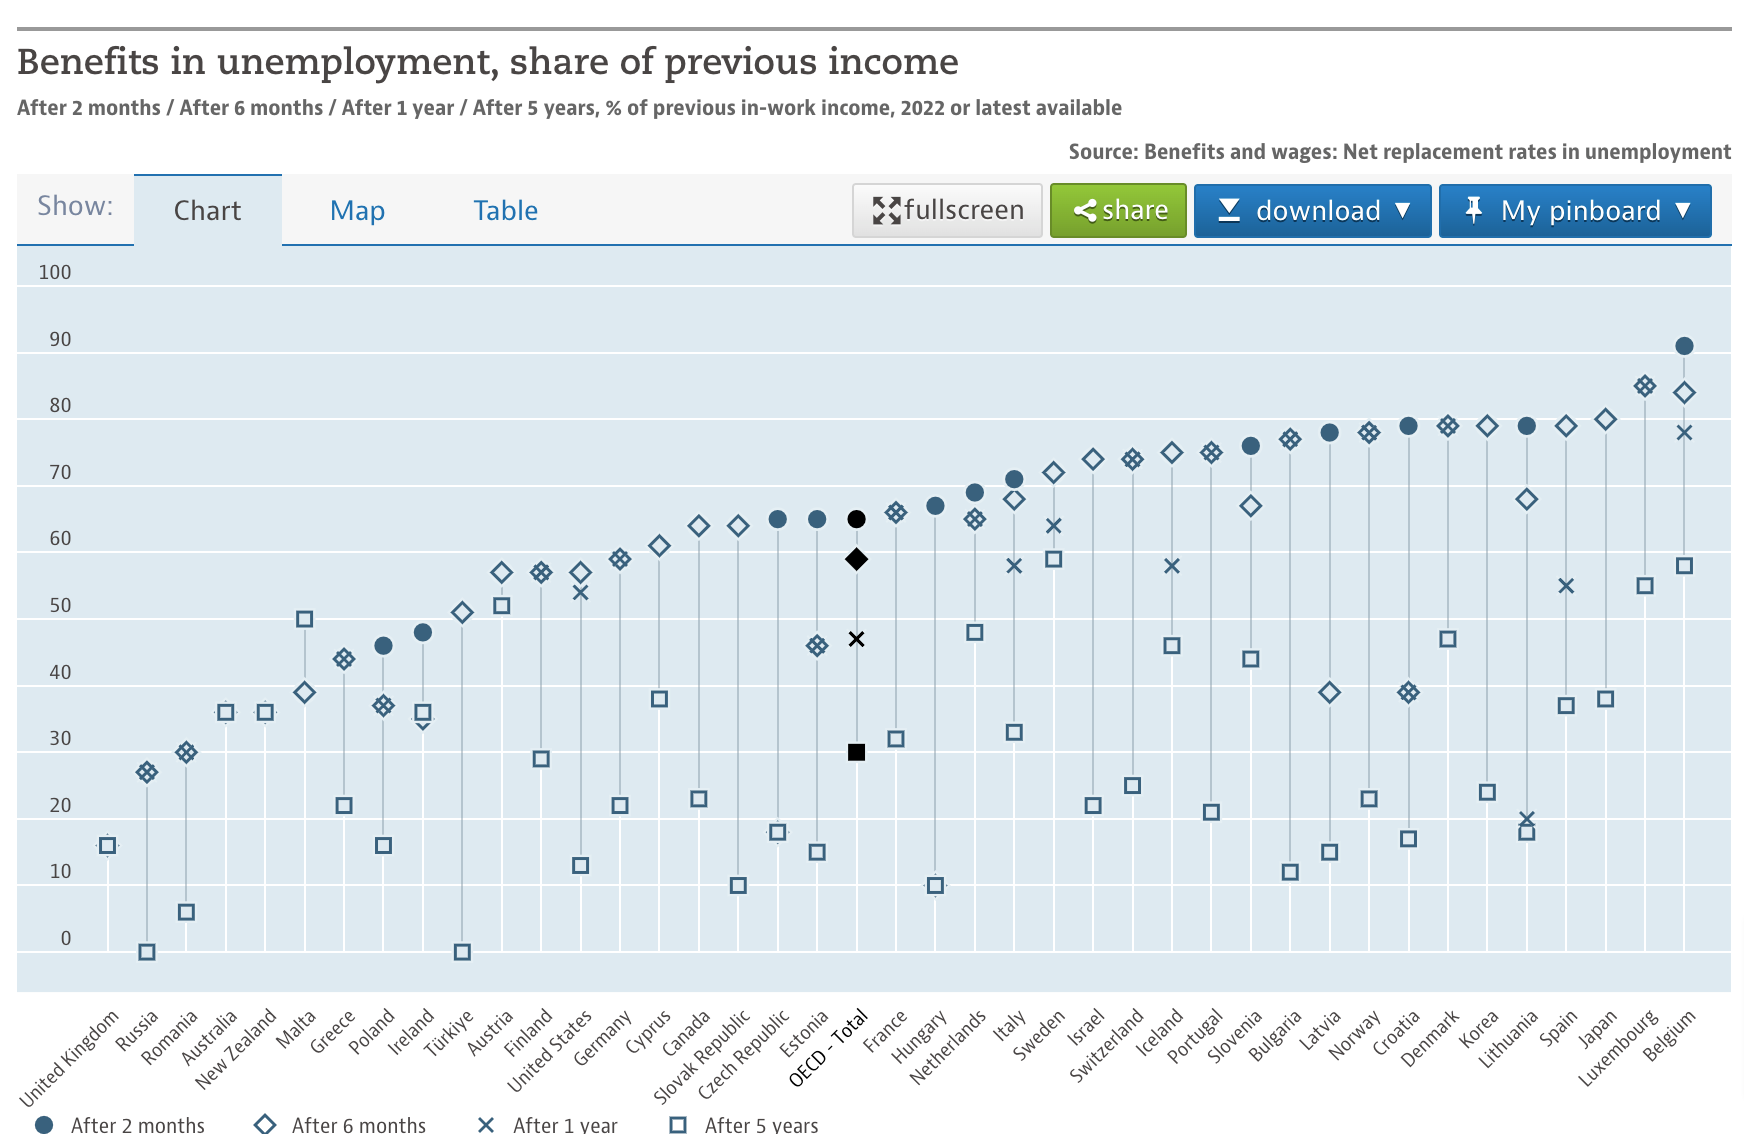 OECD chart showing UK last in 'Benefits in unemployment, share of previous income'